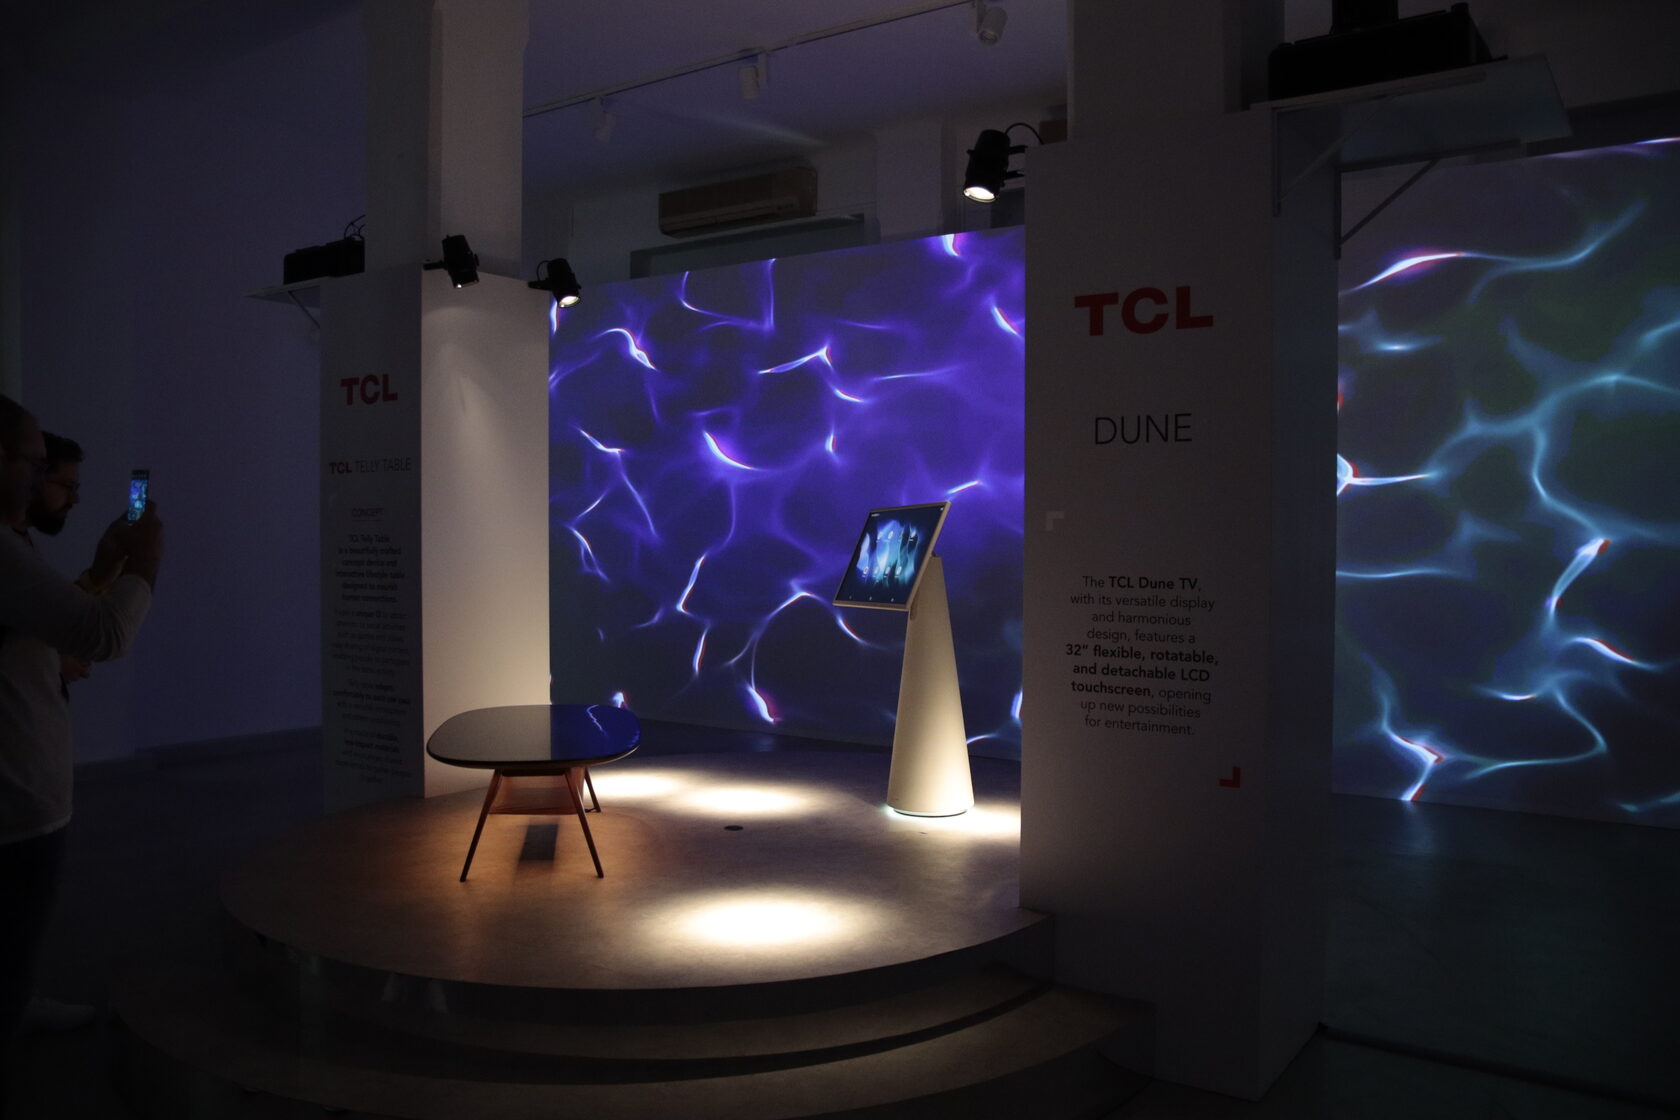 TCL Attends Milan Design Week 2023 with Latest Vision and Technology